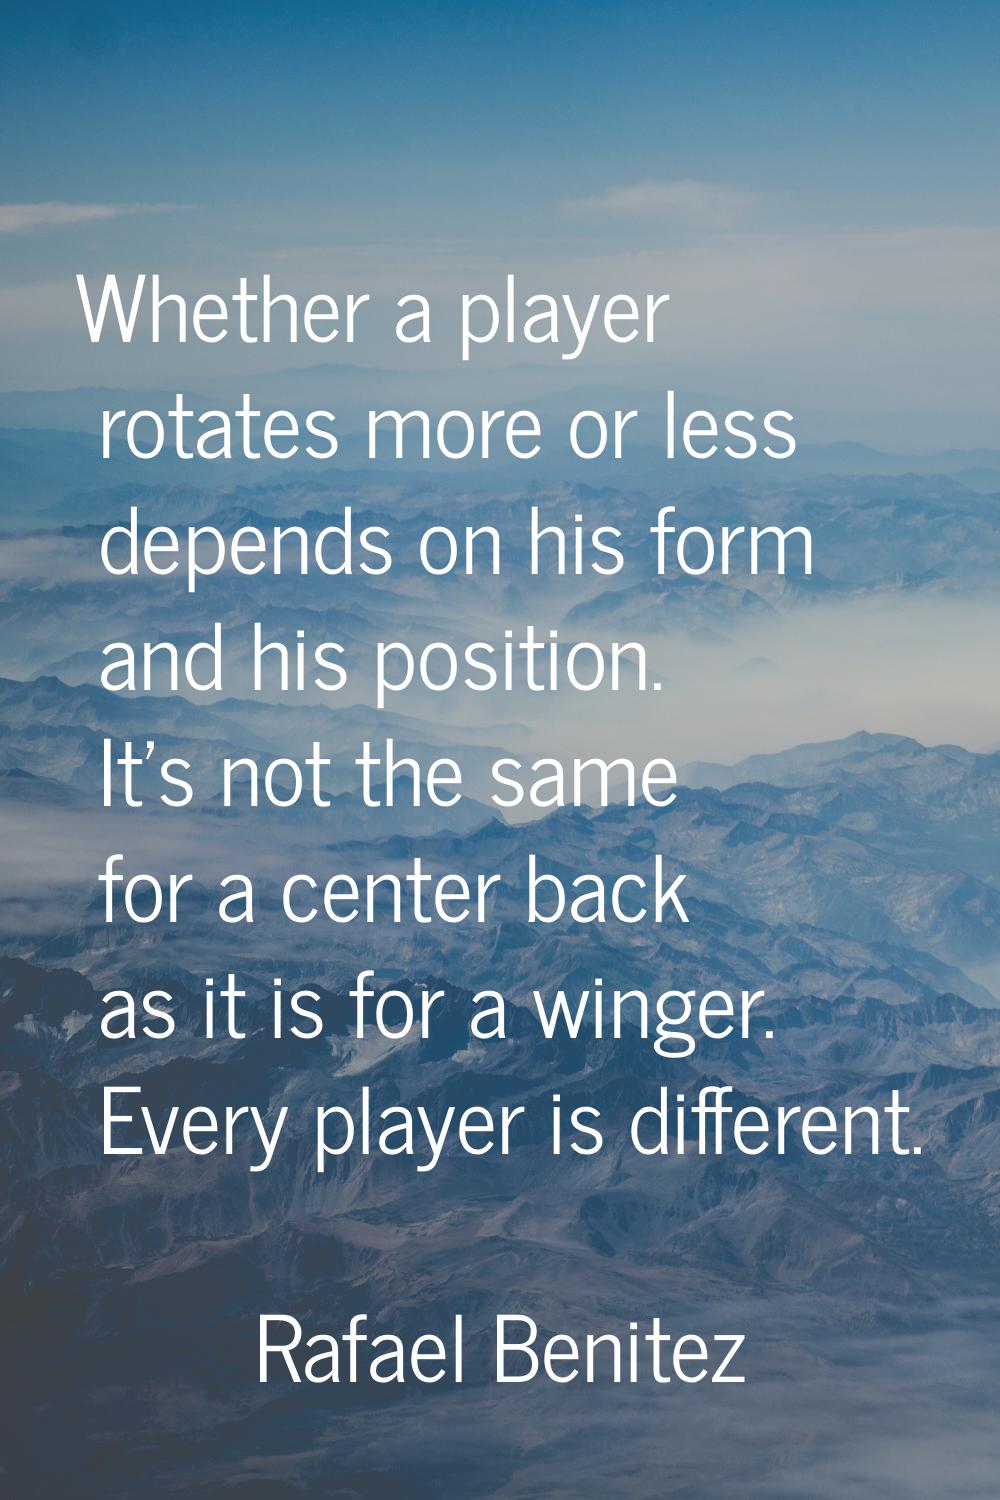 Whether a player rotates more or less depends on his form and his position. It's not the same for a